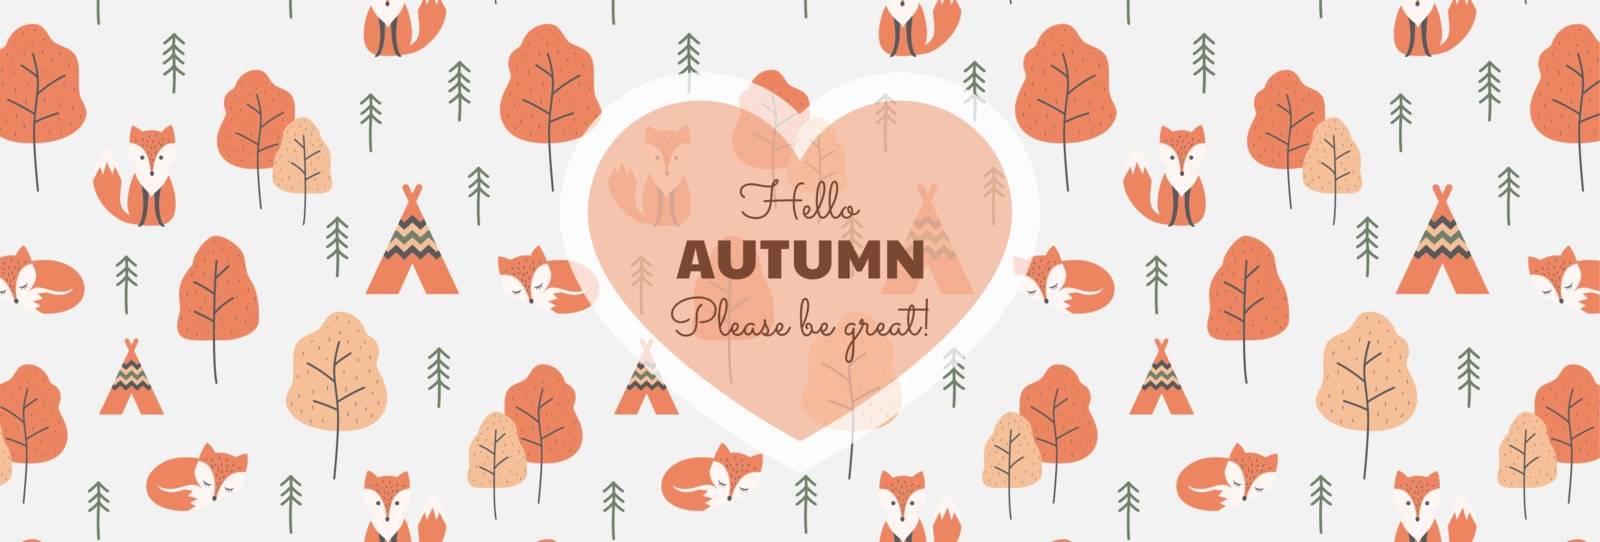 Text lettering with foxes and trees background, autumn colors vector